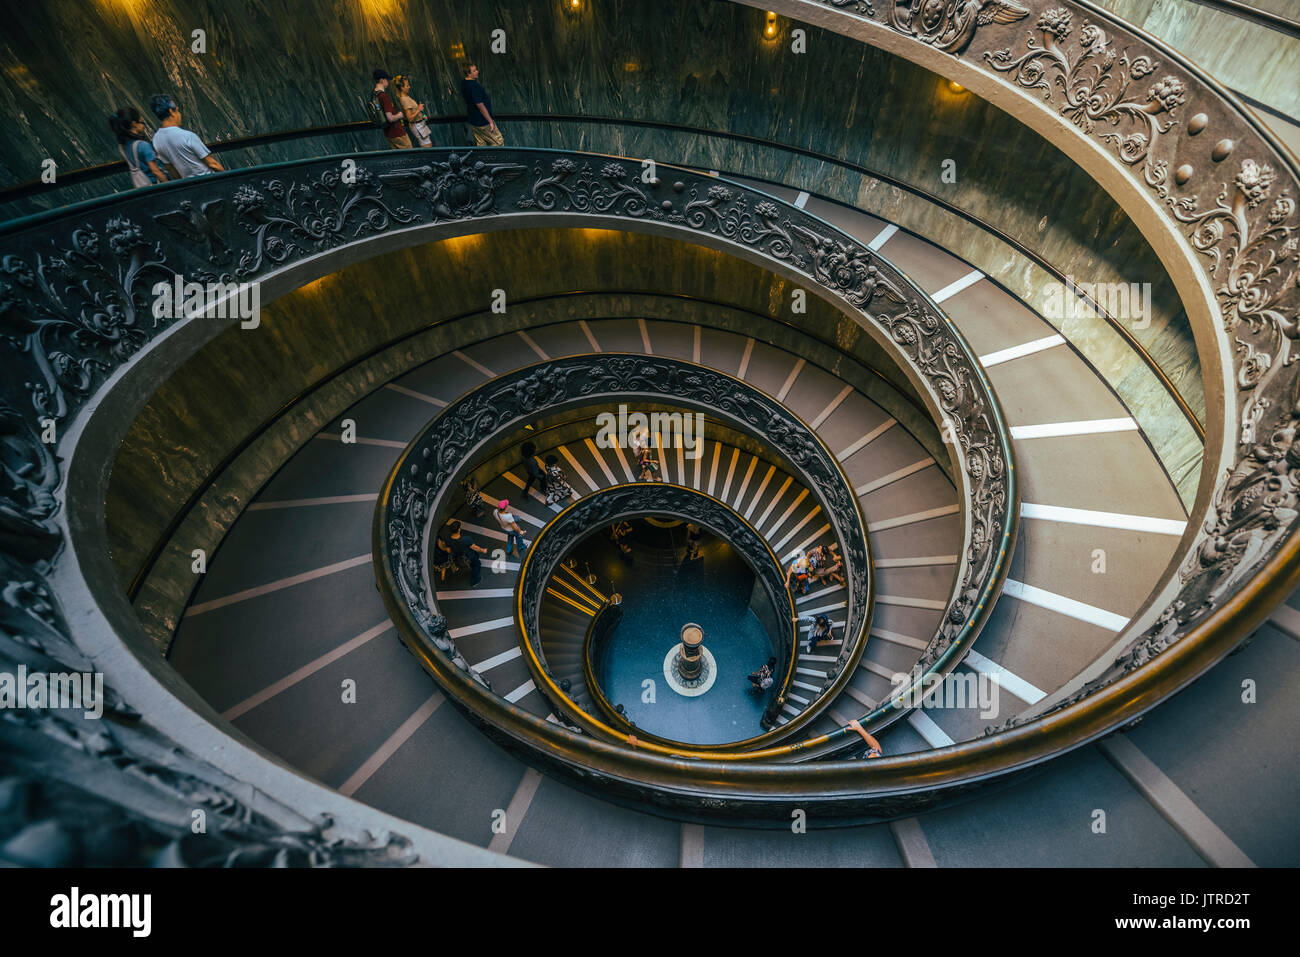 Looking down on the famous double helix Bramante staircase at the Vatican Museums exit, Rome, Italy Stock Photo